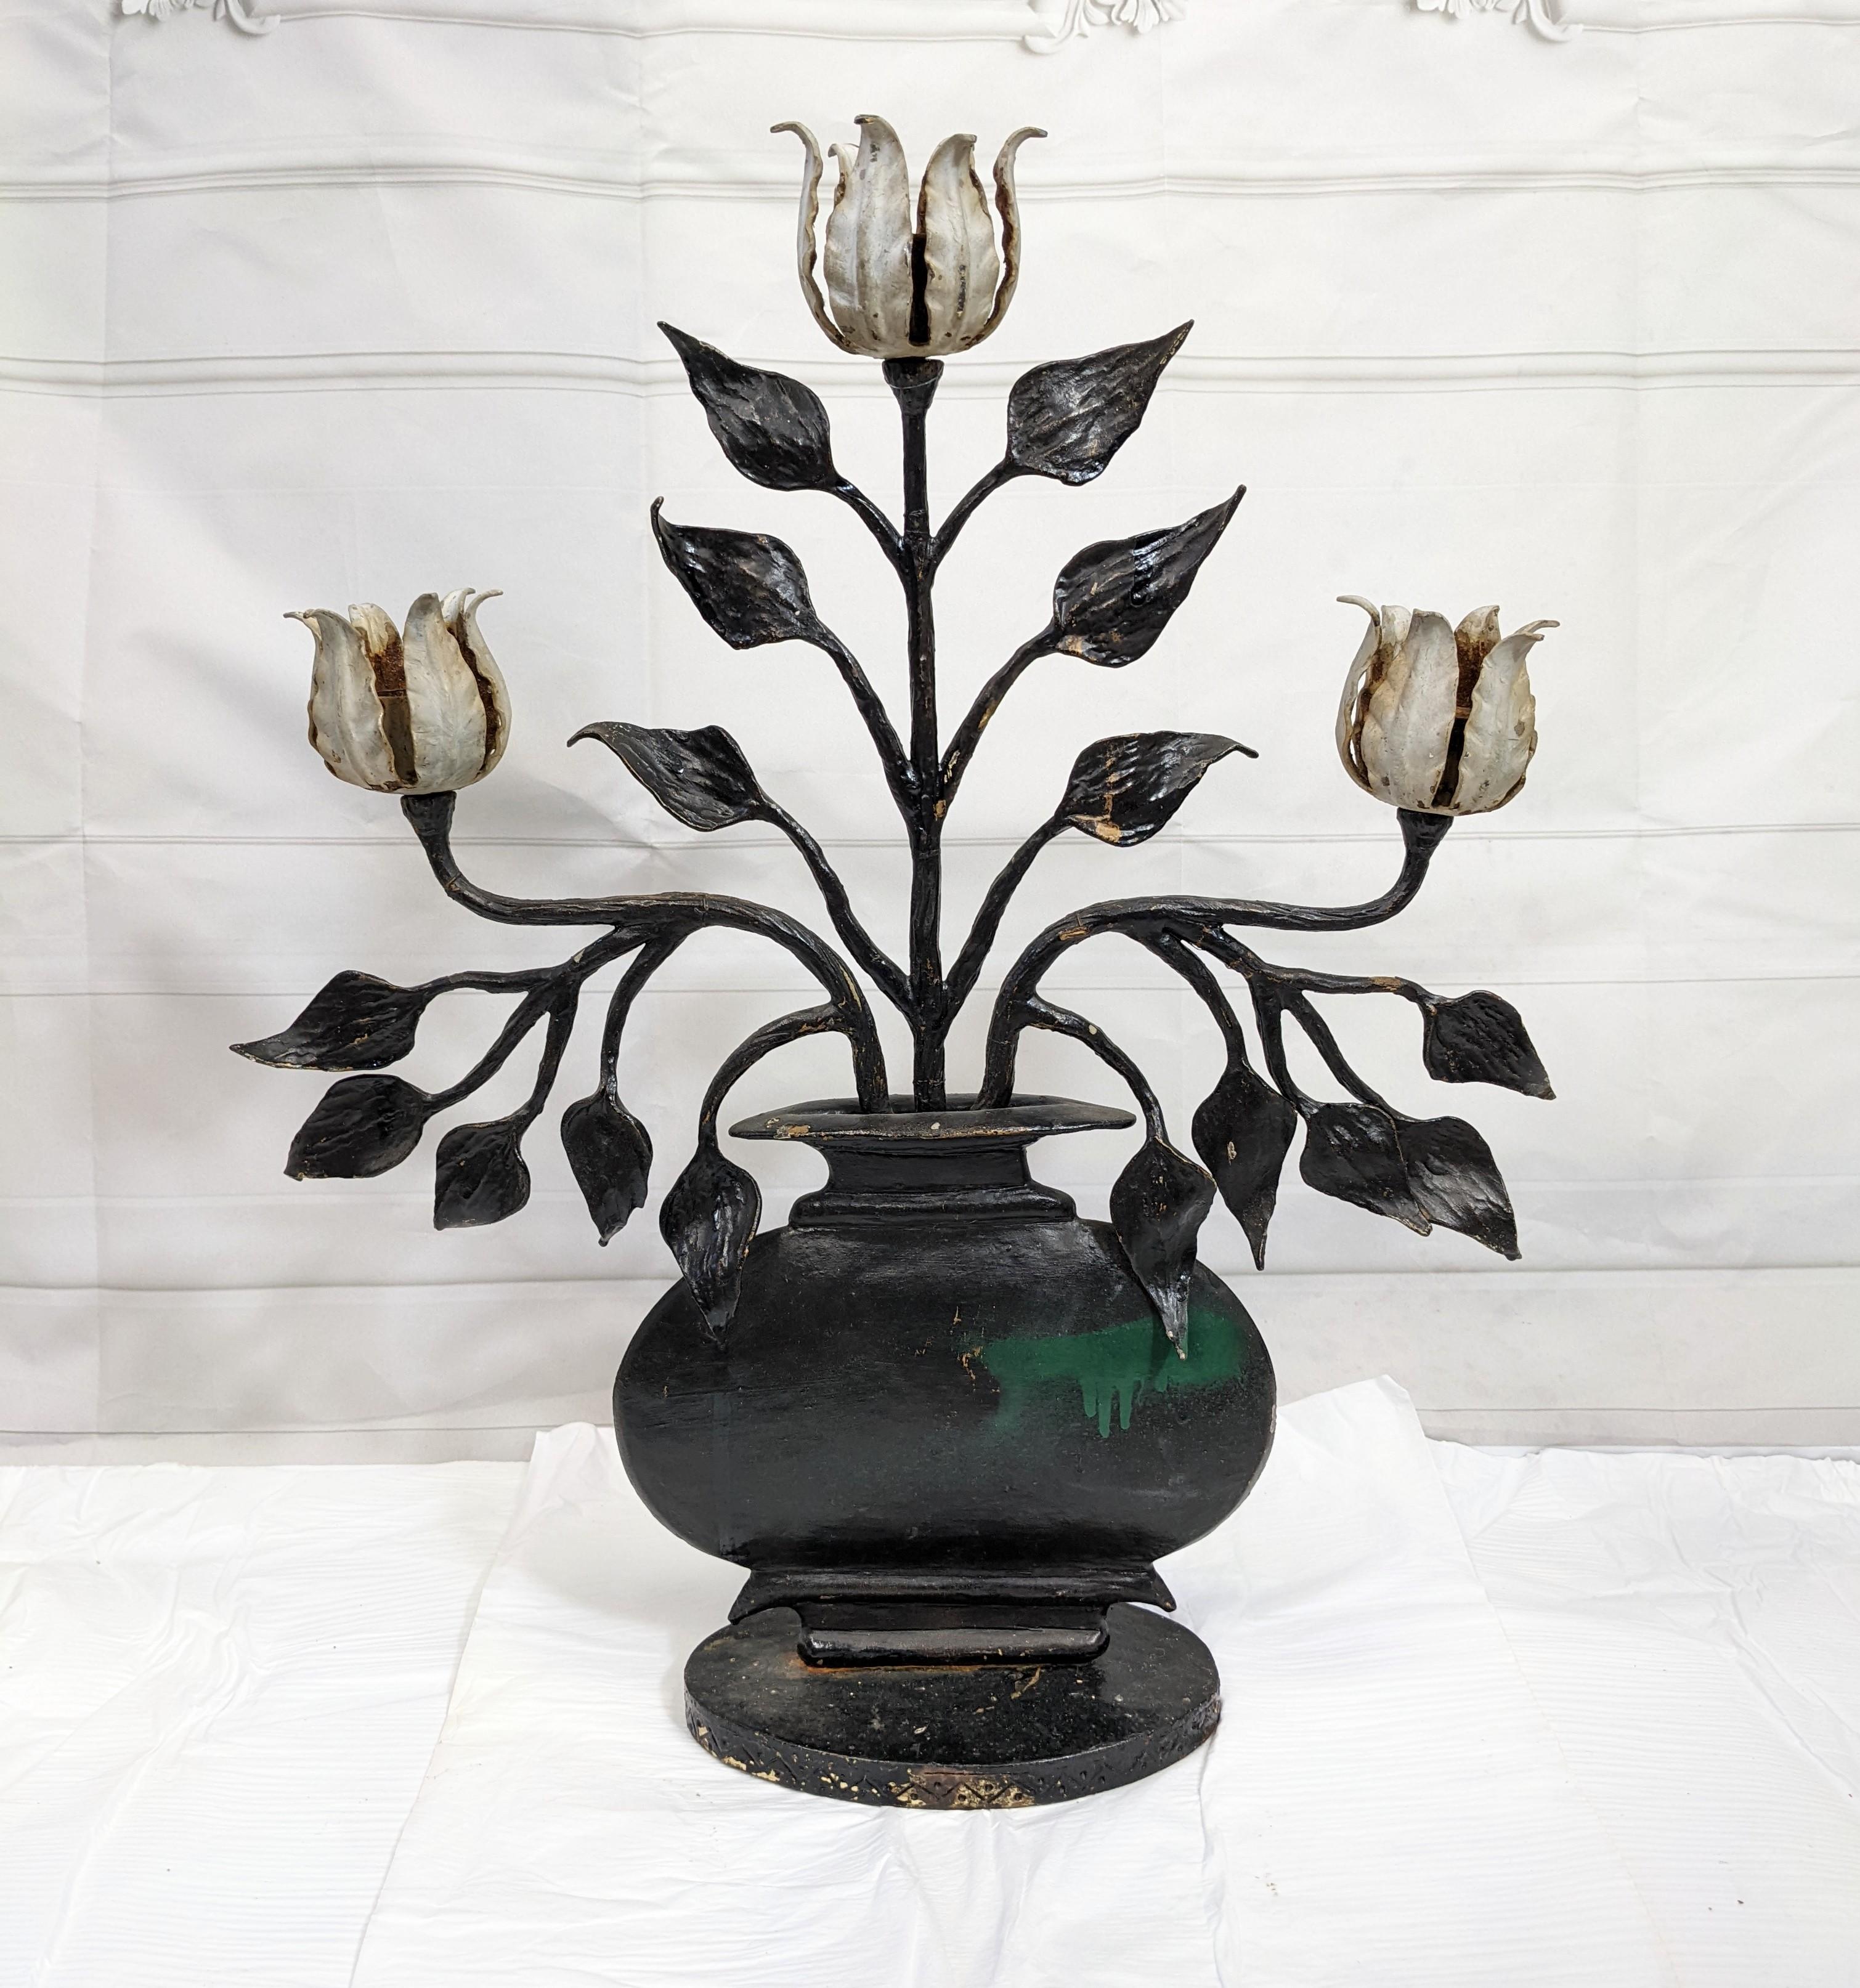 Charming hand wrought iron Folk Art Tulip Candleabra from the 1930's. Heavy enough to use as doorstop as well. Beautifully rendered. 1930's USA.
Measures: Height 20